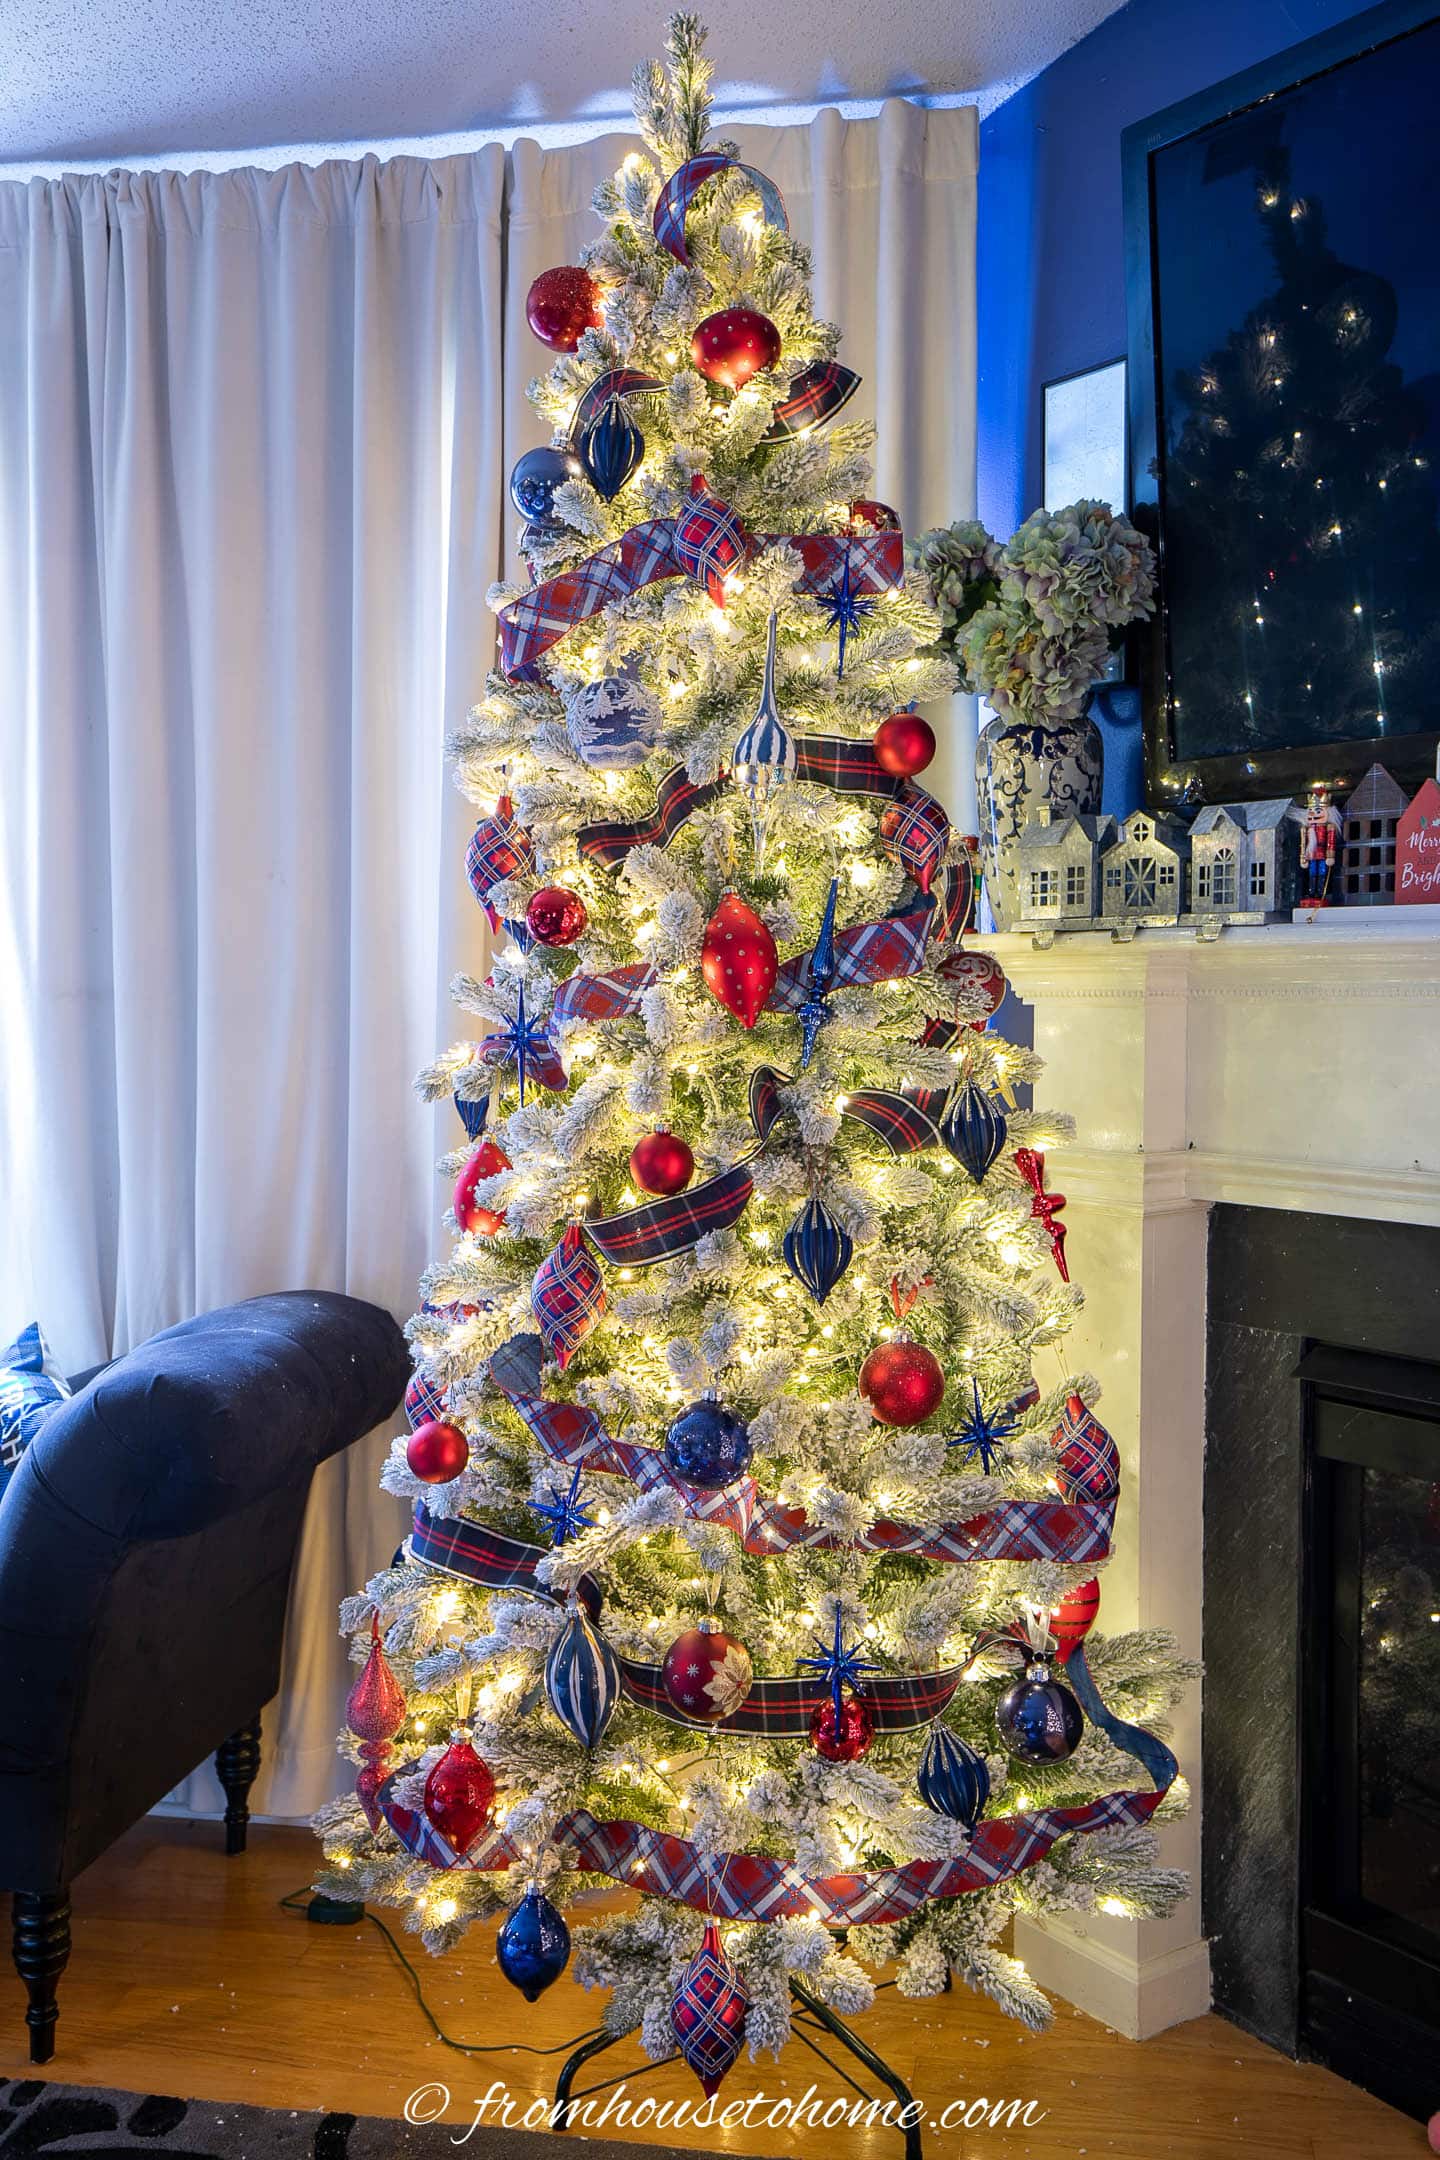 Christmas tree with dark blue ornaments, red ornaments and red and blue plaid ribbon